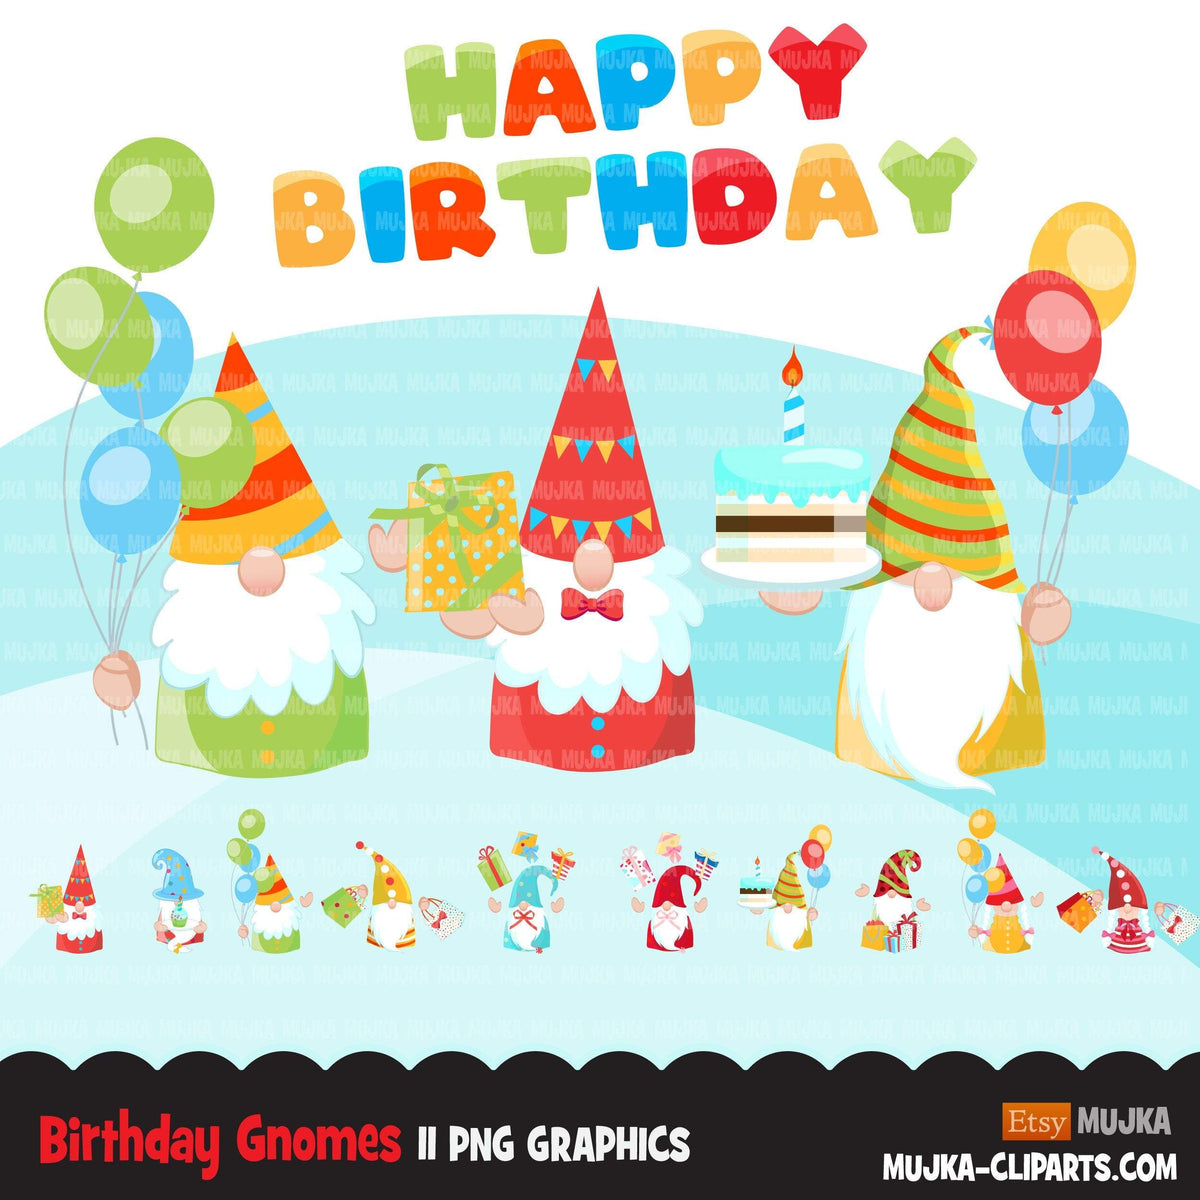 Birthday gnomes Clipart, birthday graphics, colorful party ...